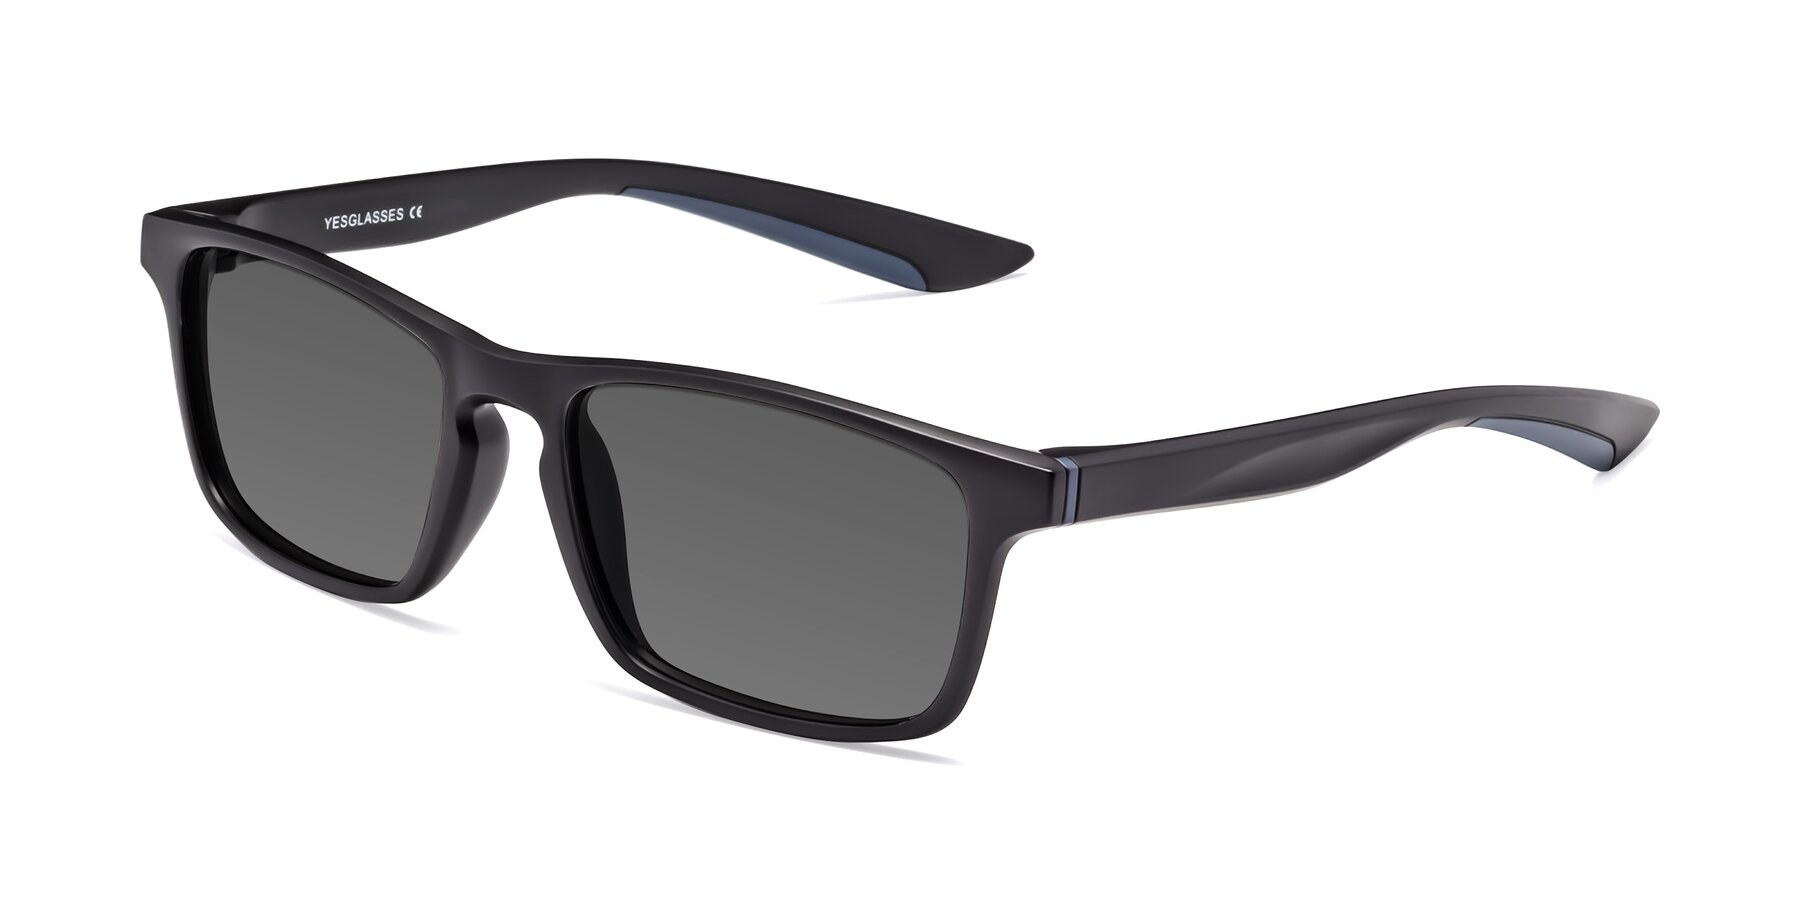 Angle of Passion in Matte Black-Blue with Medium Gray Tinted Lenses